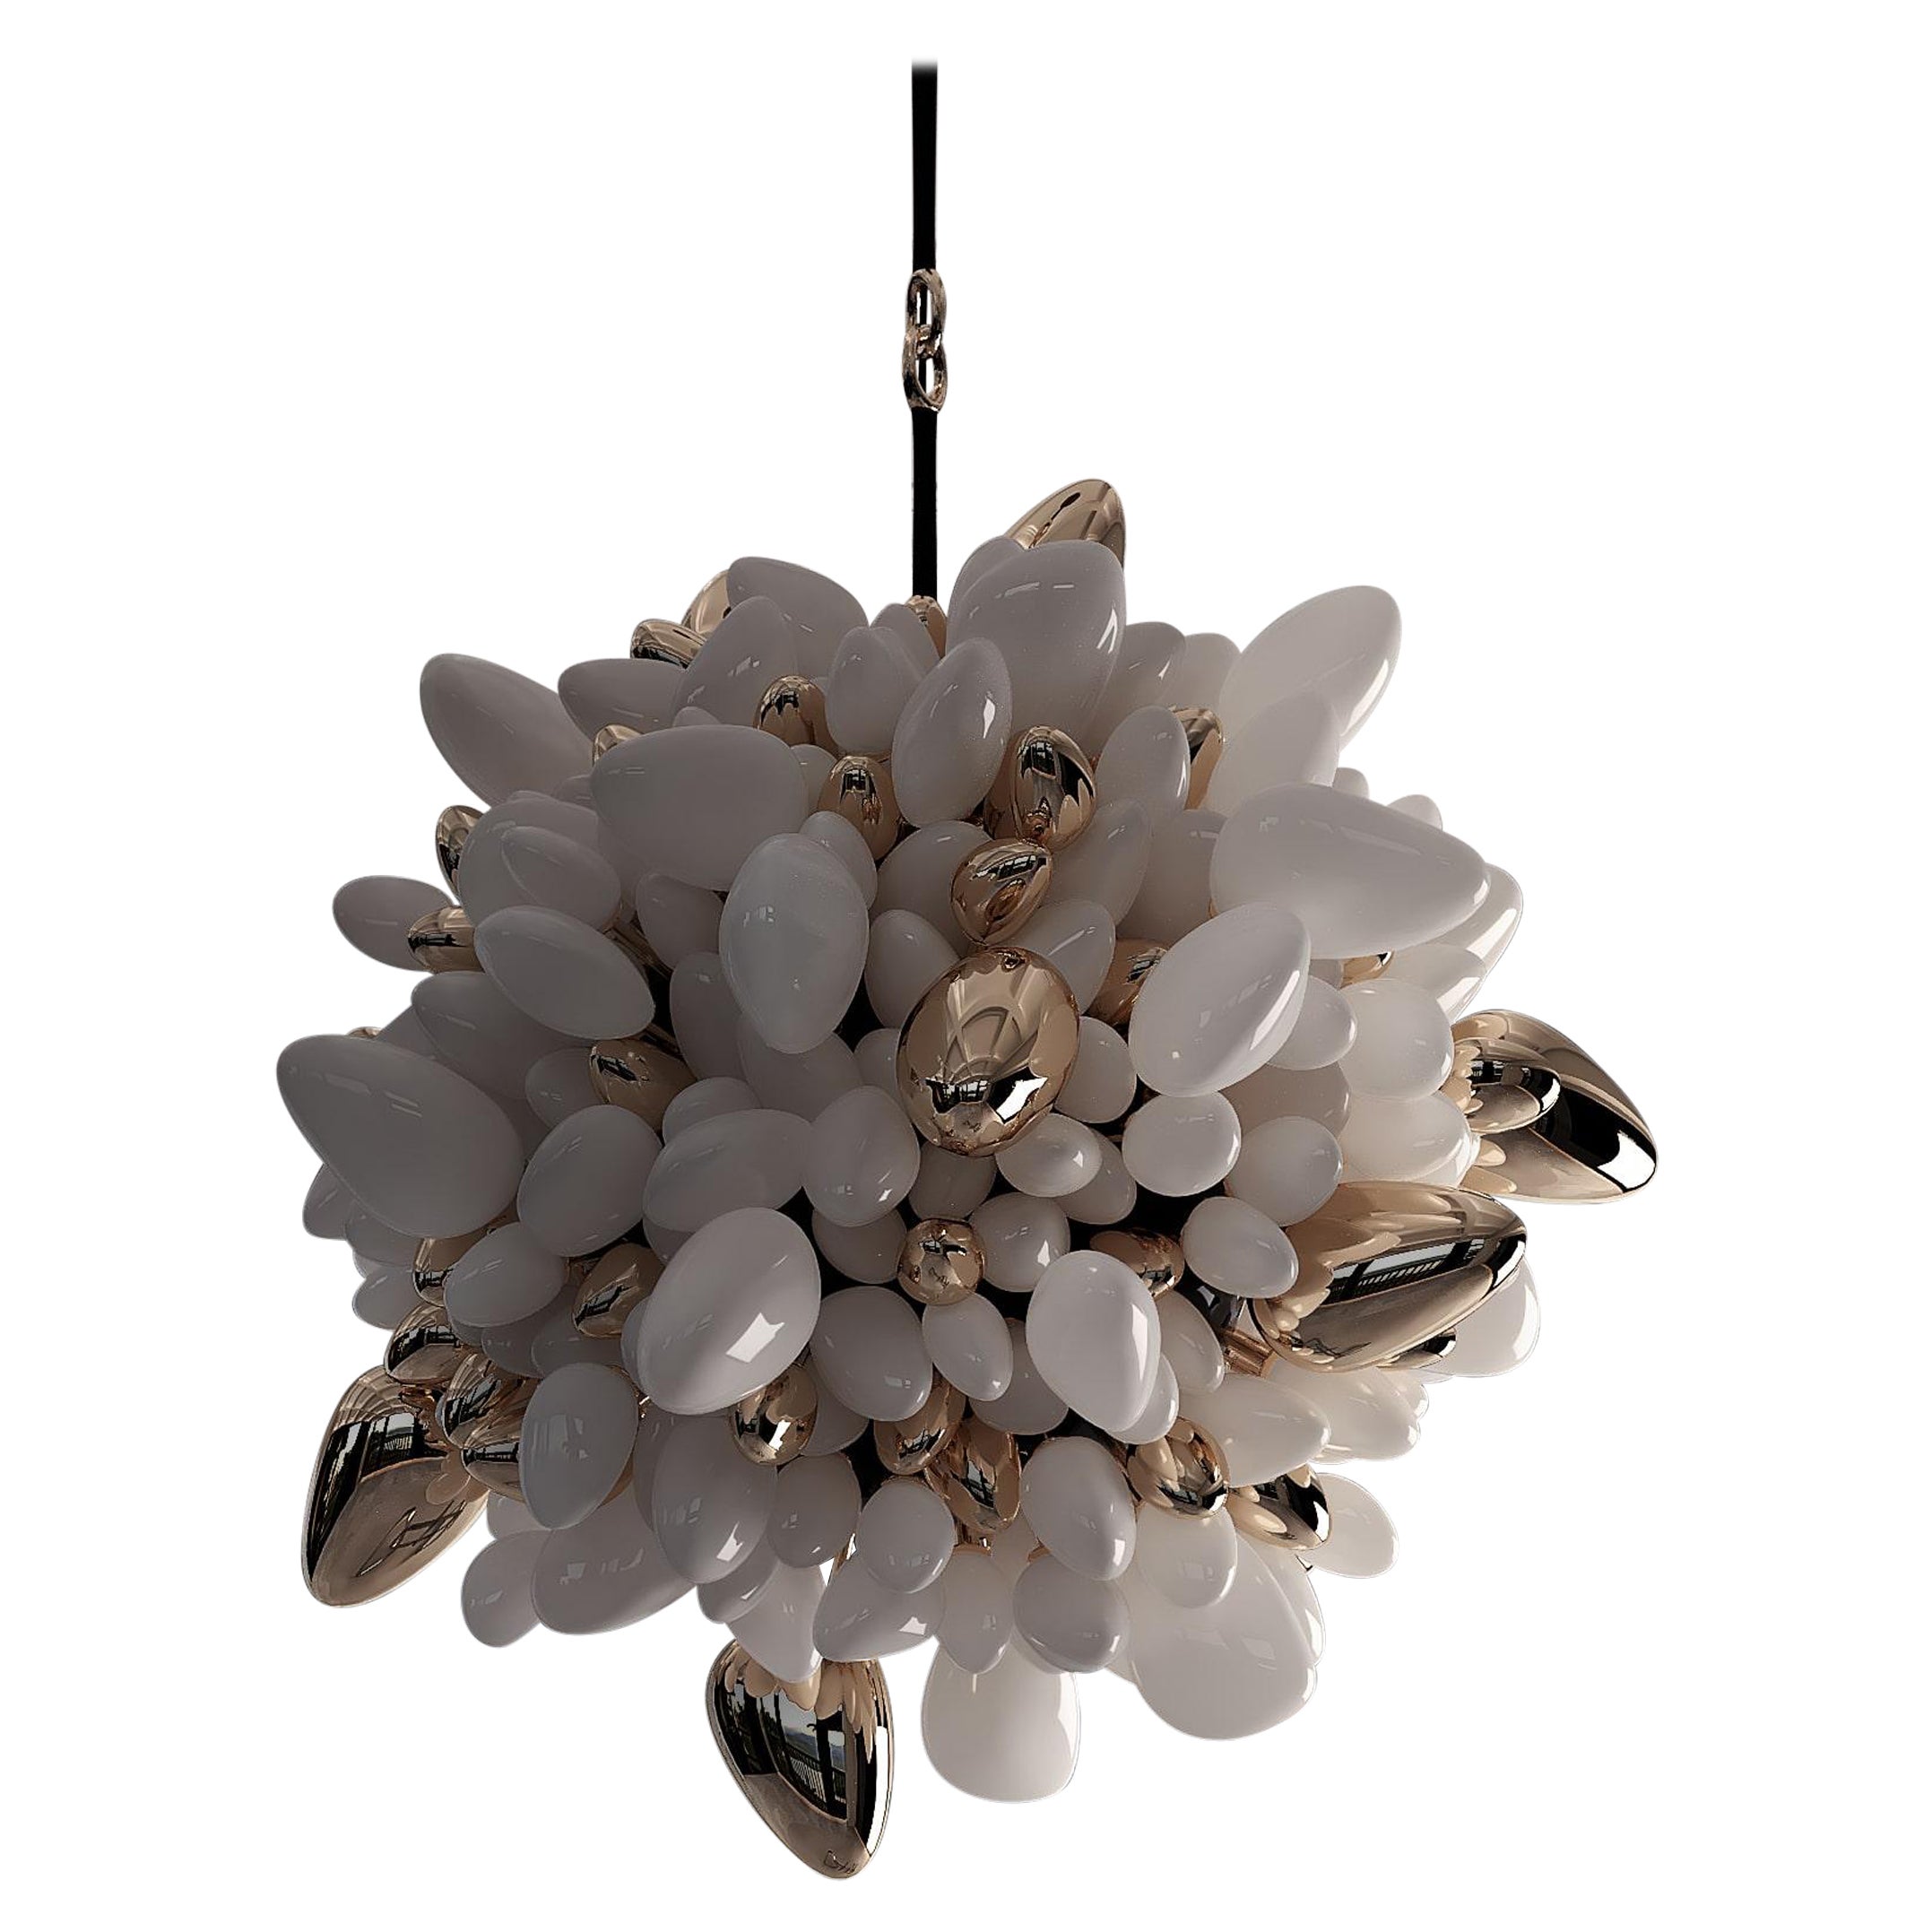 Gaia is not simply a chandelier; it is a testament to the Goddess of Natural World. This chandelier seamlessly merges different shaped, sized glass and bronze, each carefully chosen to evoke a sense of wonder and mystique. From delicate spheres to